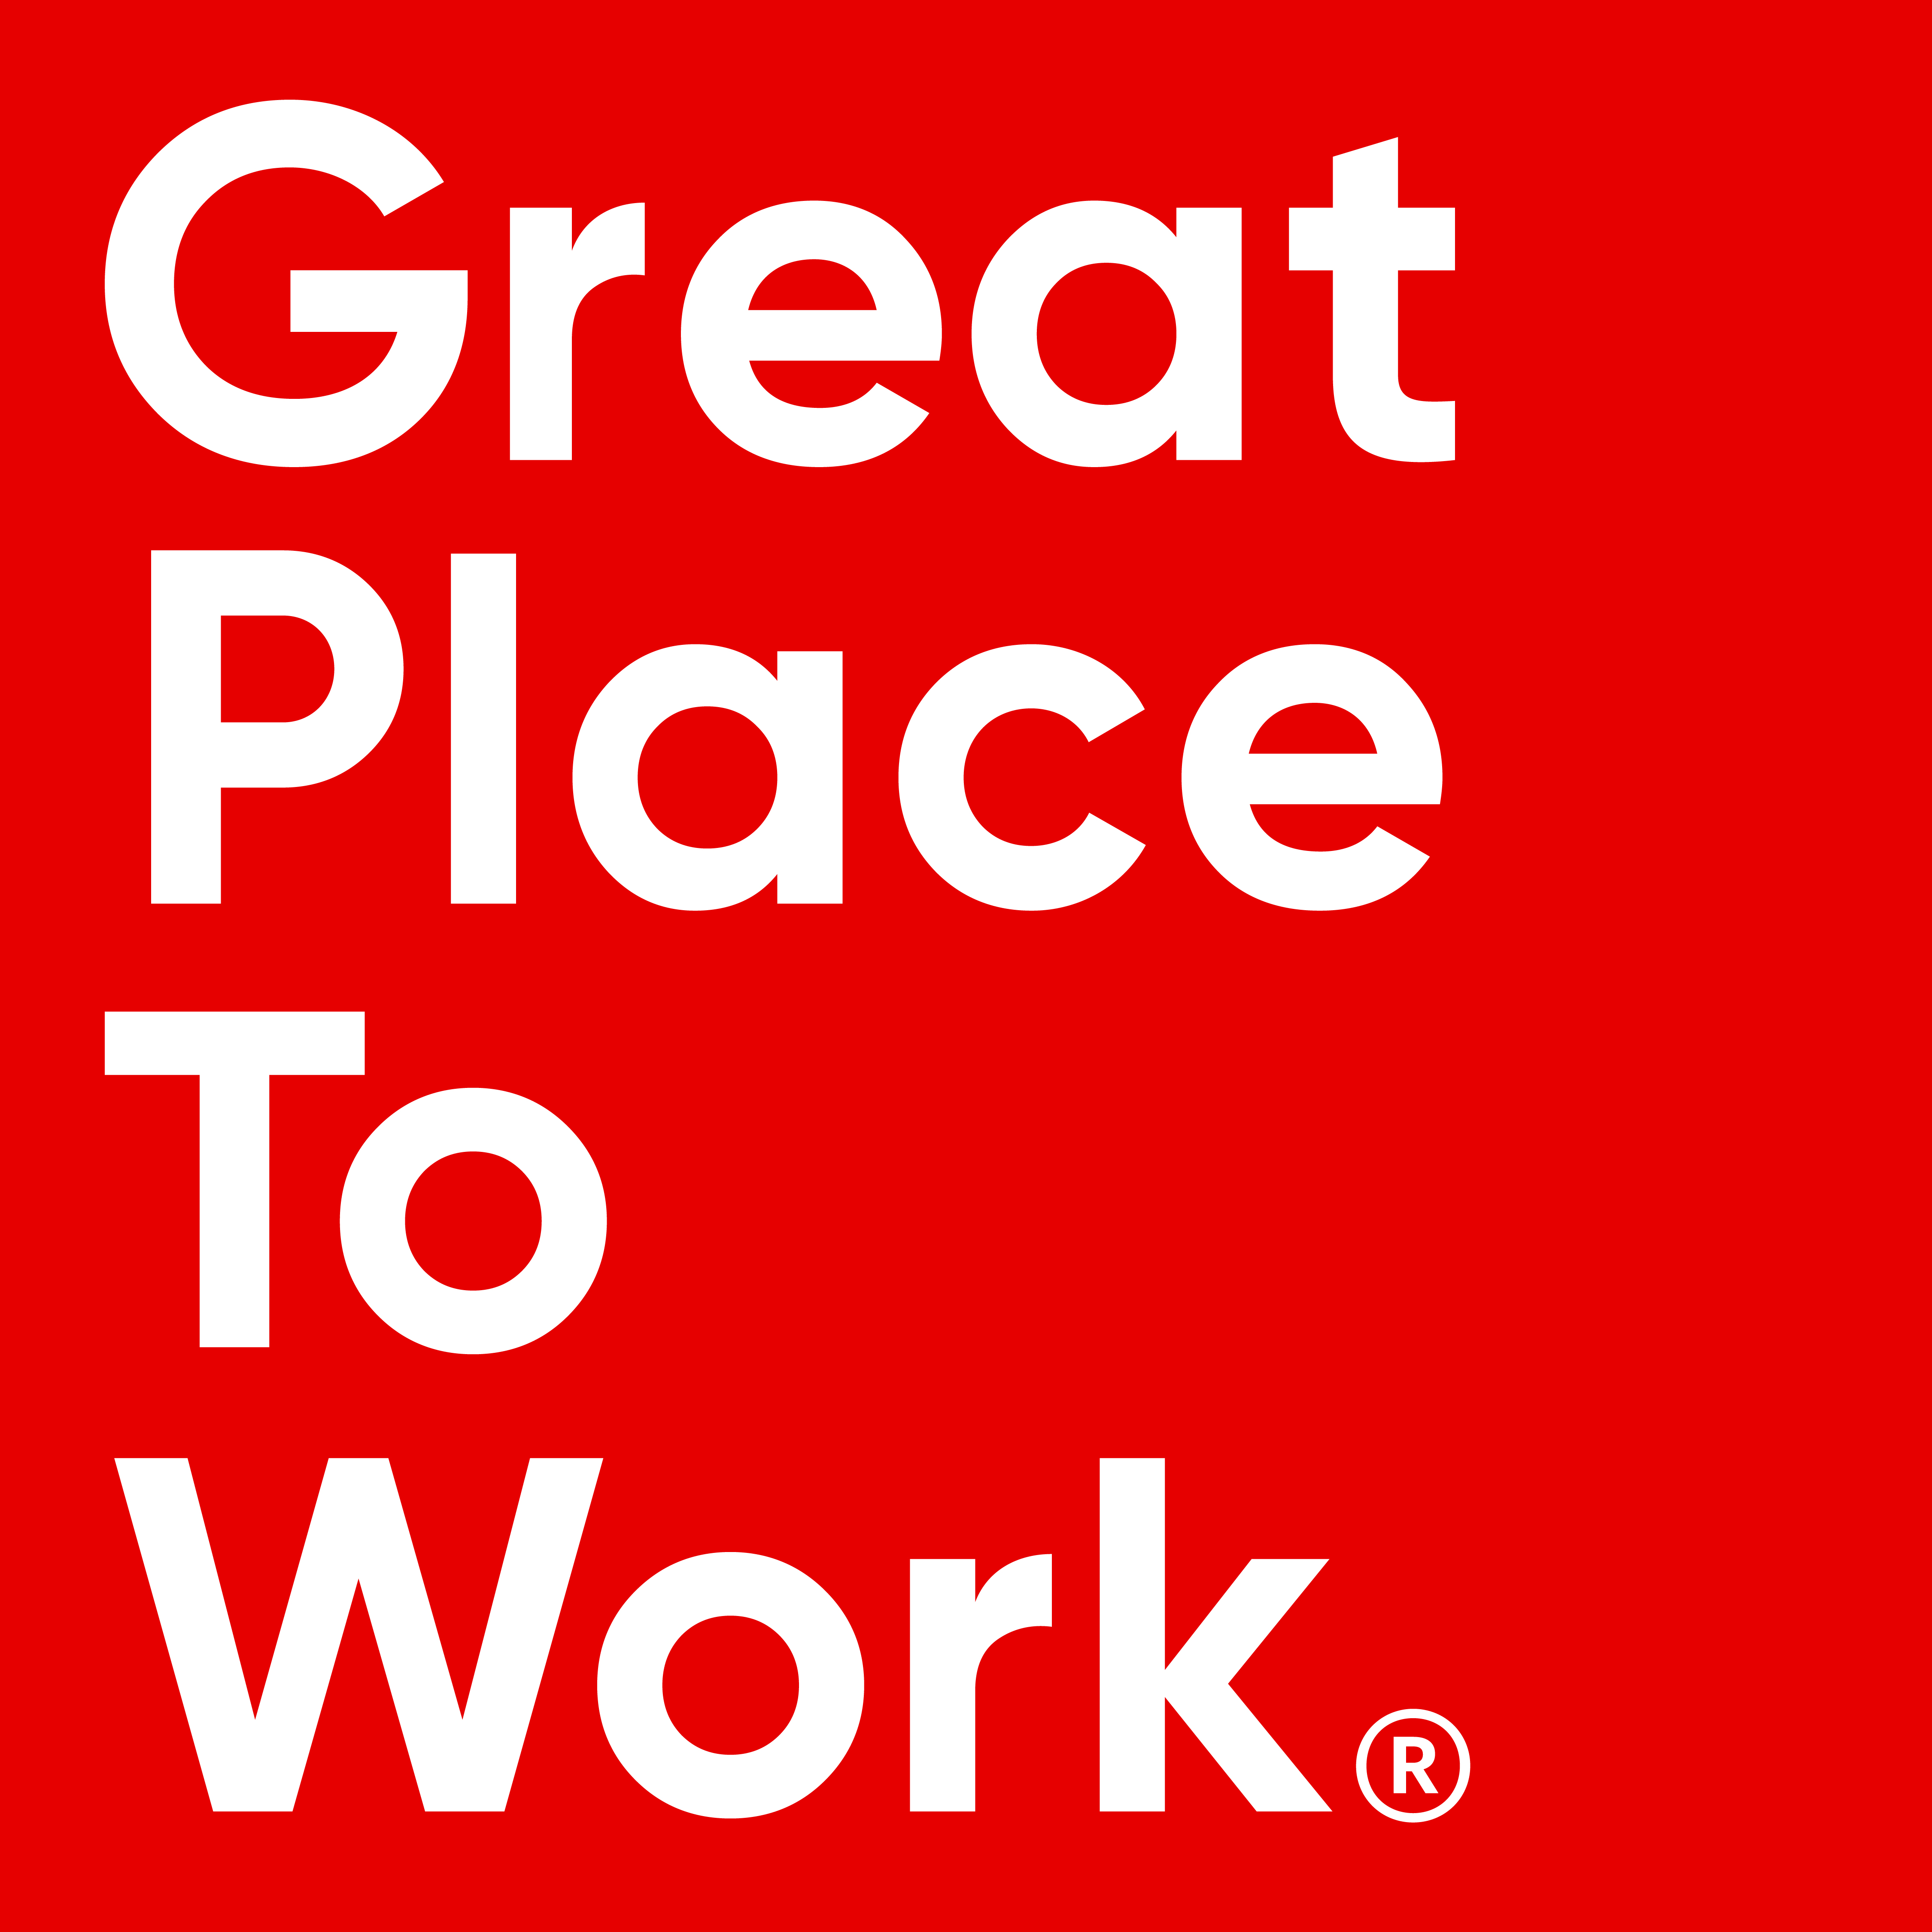 Great Place to Work Inc